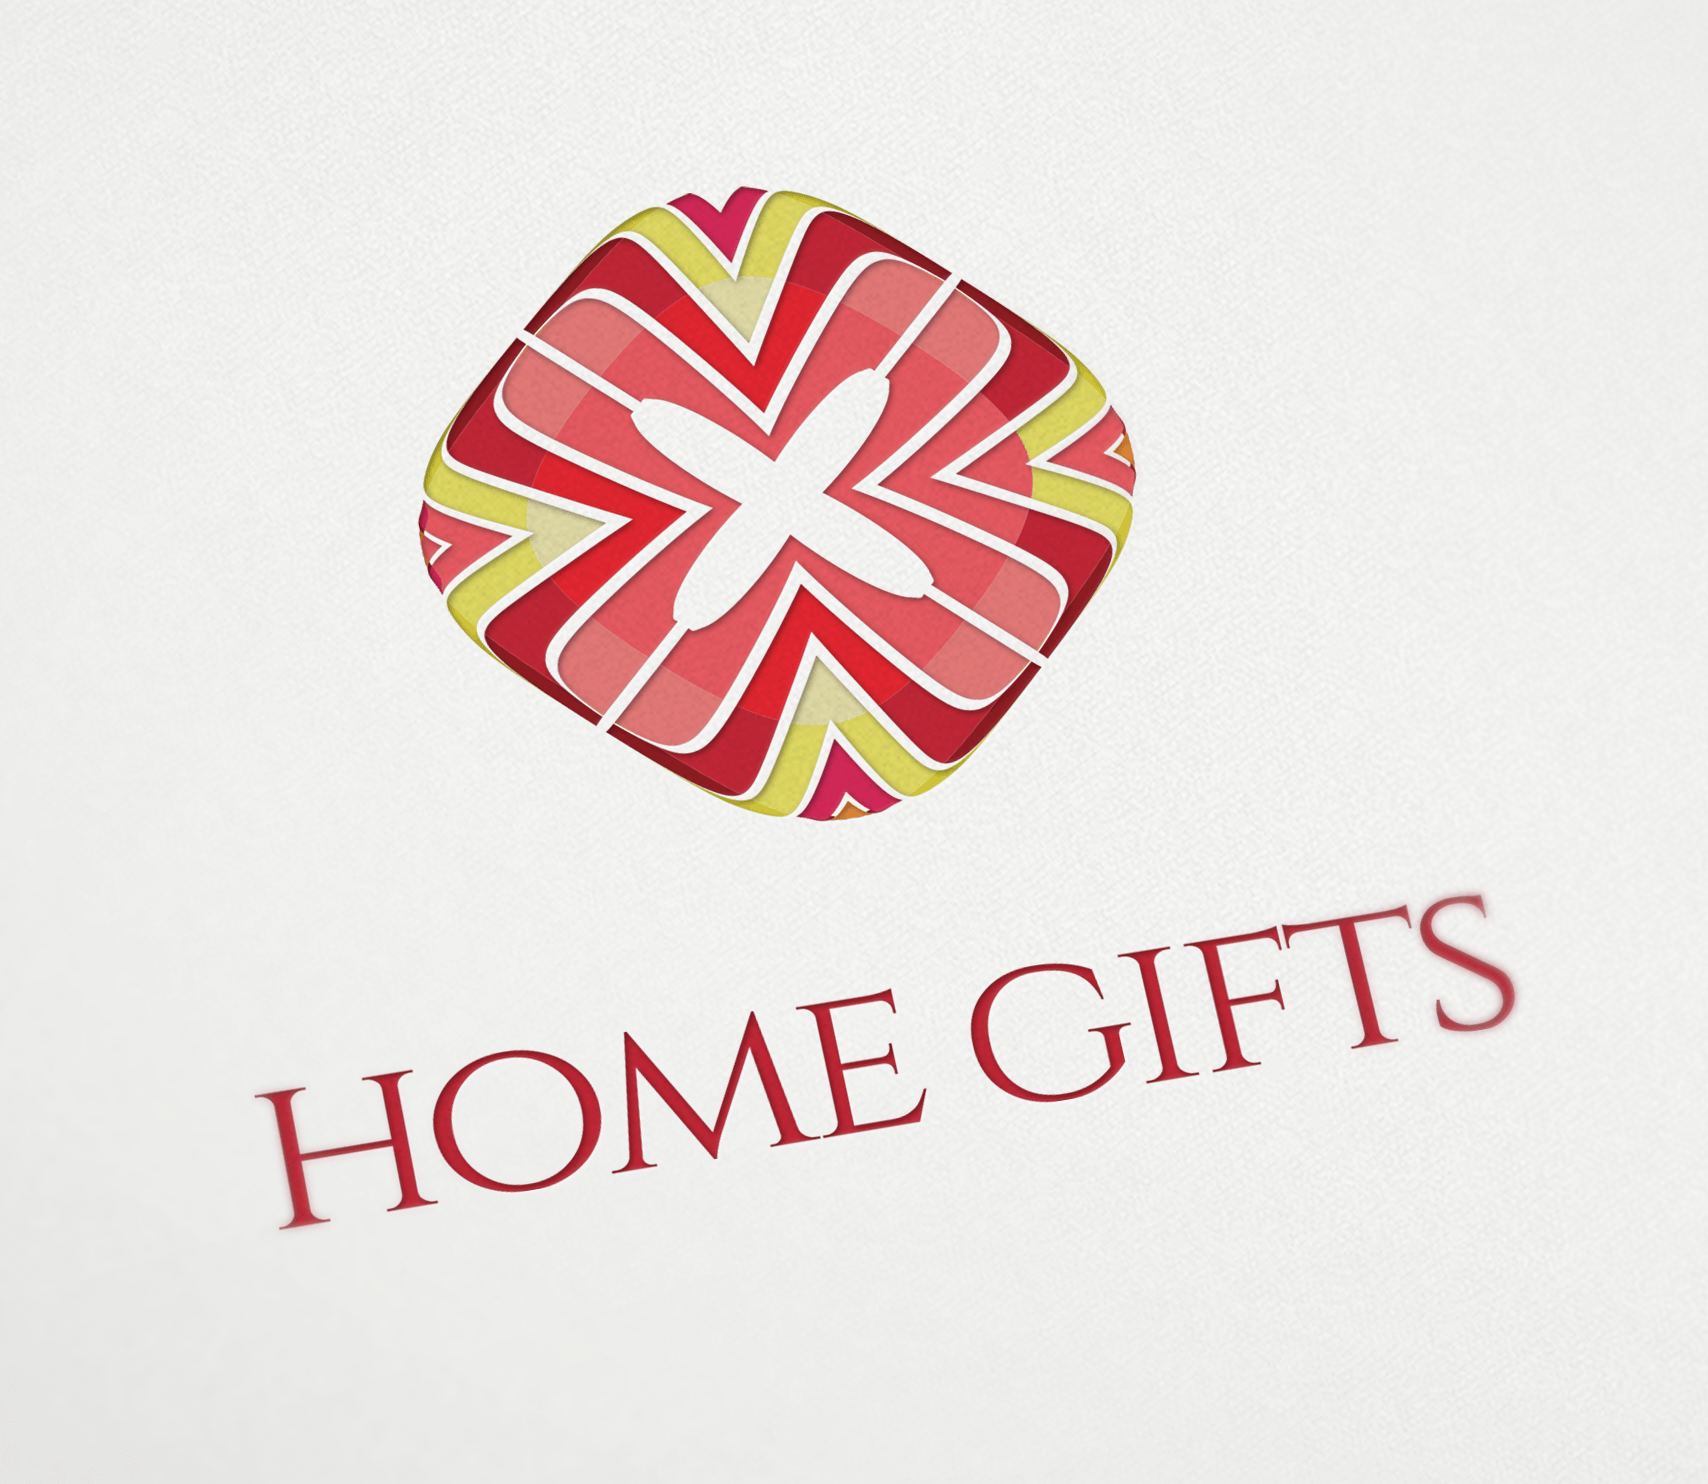 Craft-Store Logo - High Quality Logo Design For Affordable Price! This Logo Is Ideal